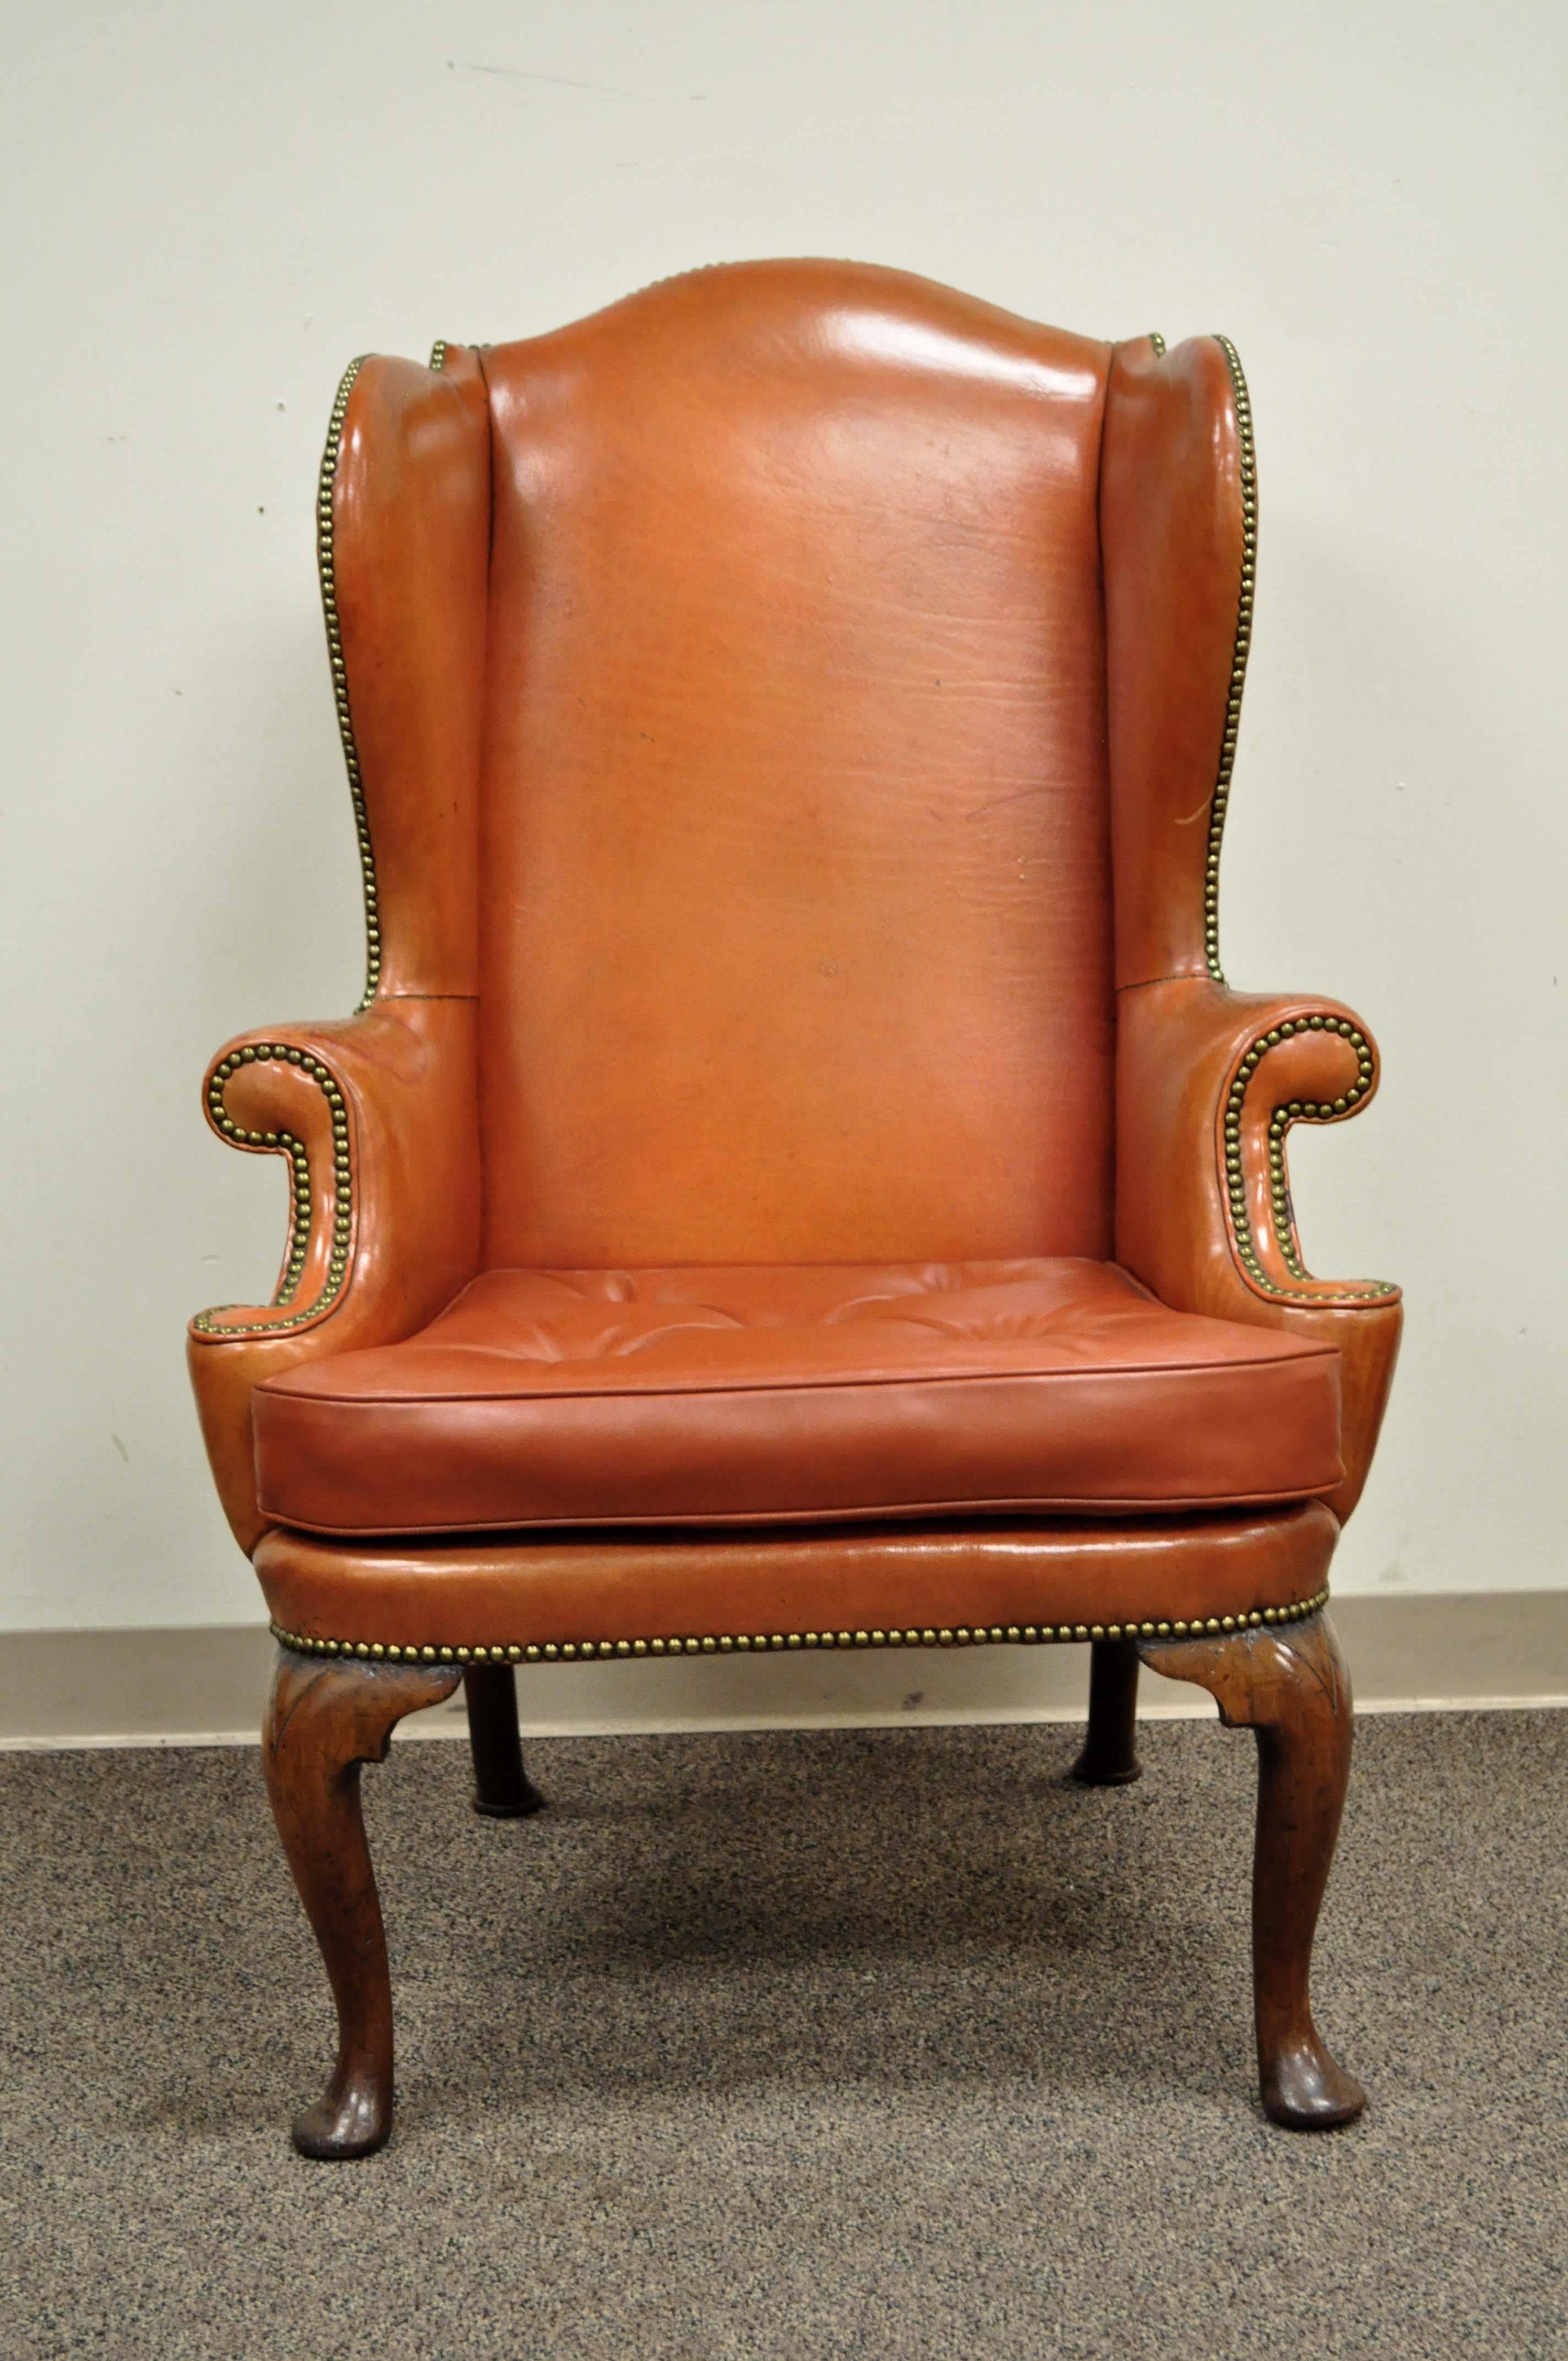 Antique 19th century burnt orange distressed leather English wingback chair. Item features a dramatic solid wood frame with rolled arms, carved Queen Anne style front legs, splayed rear legs, deep winged back, and beautiful patina to the original